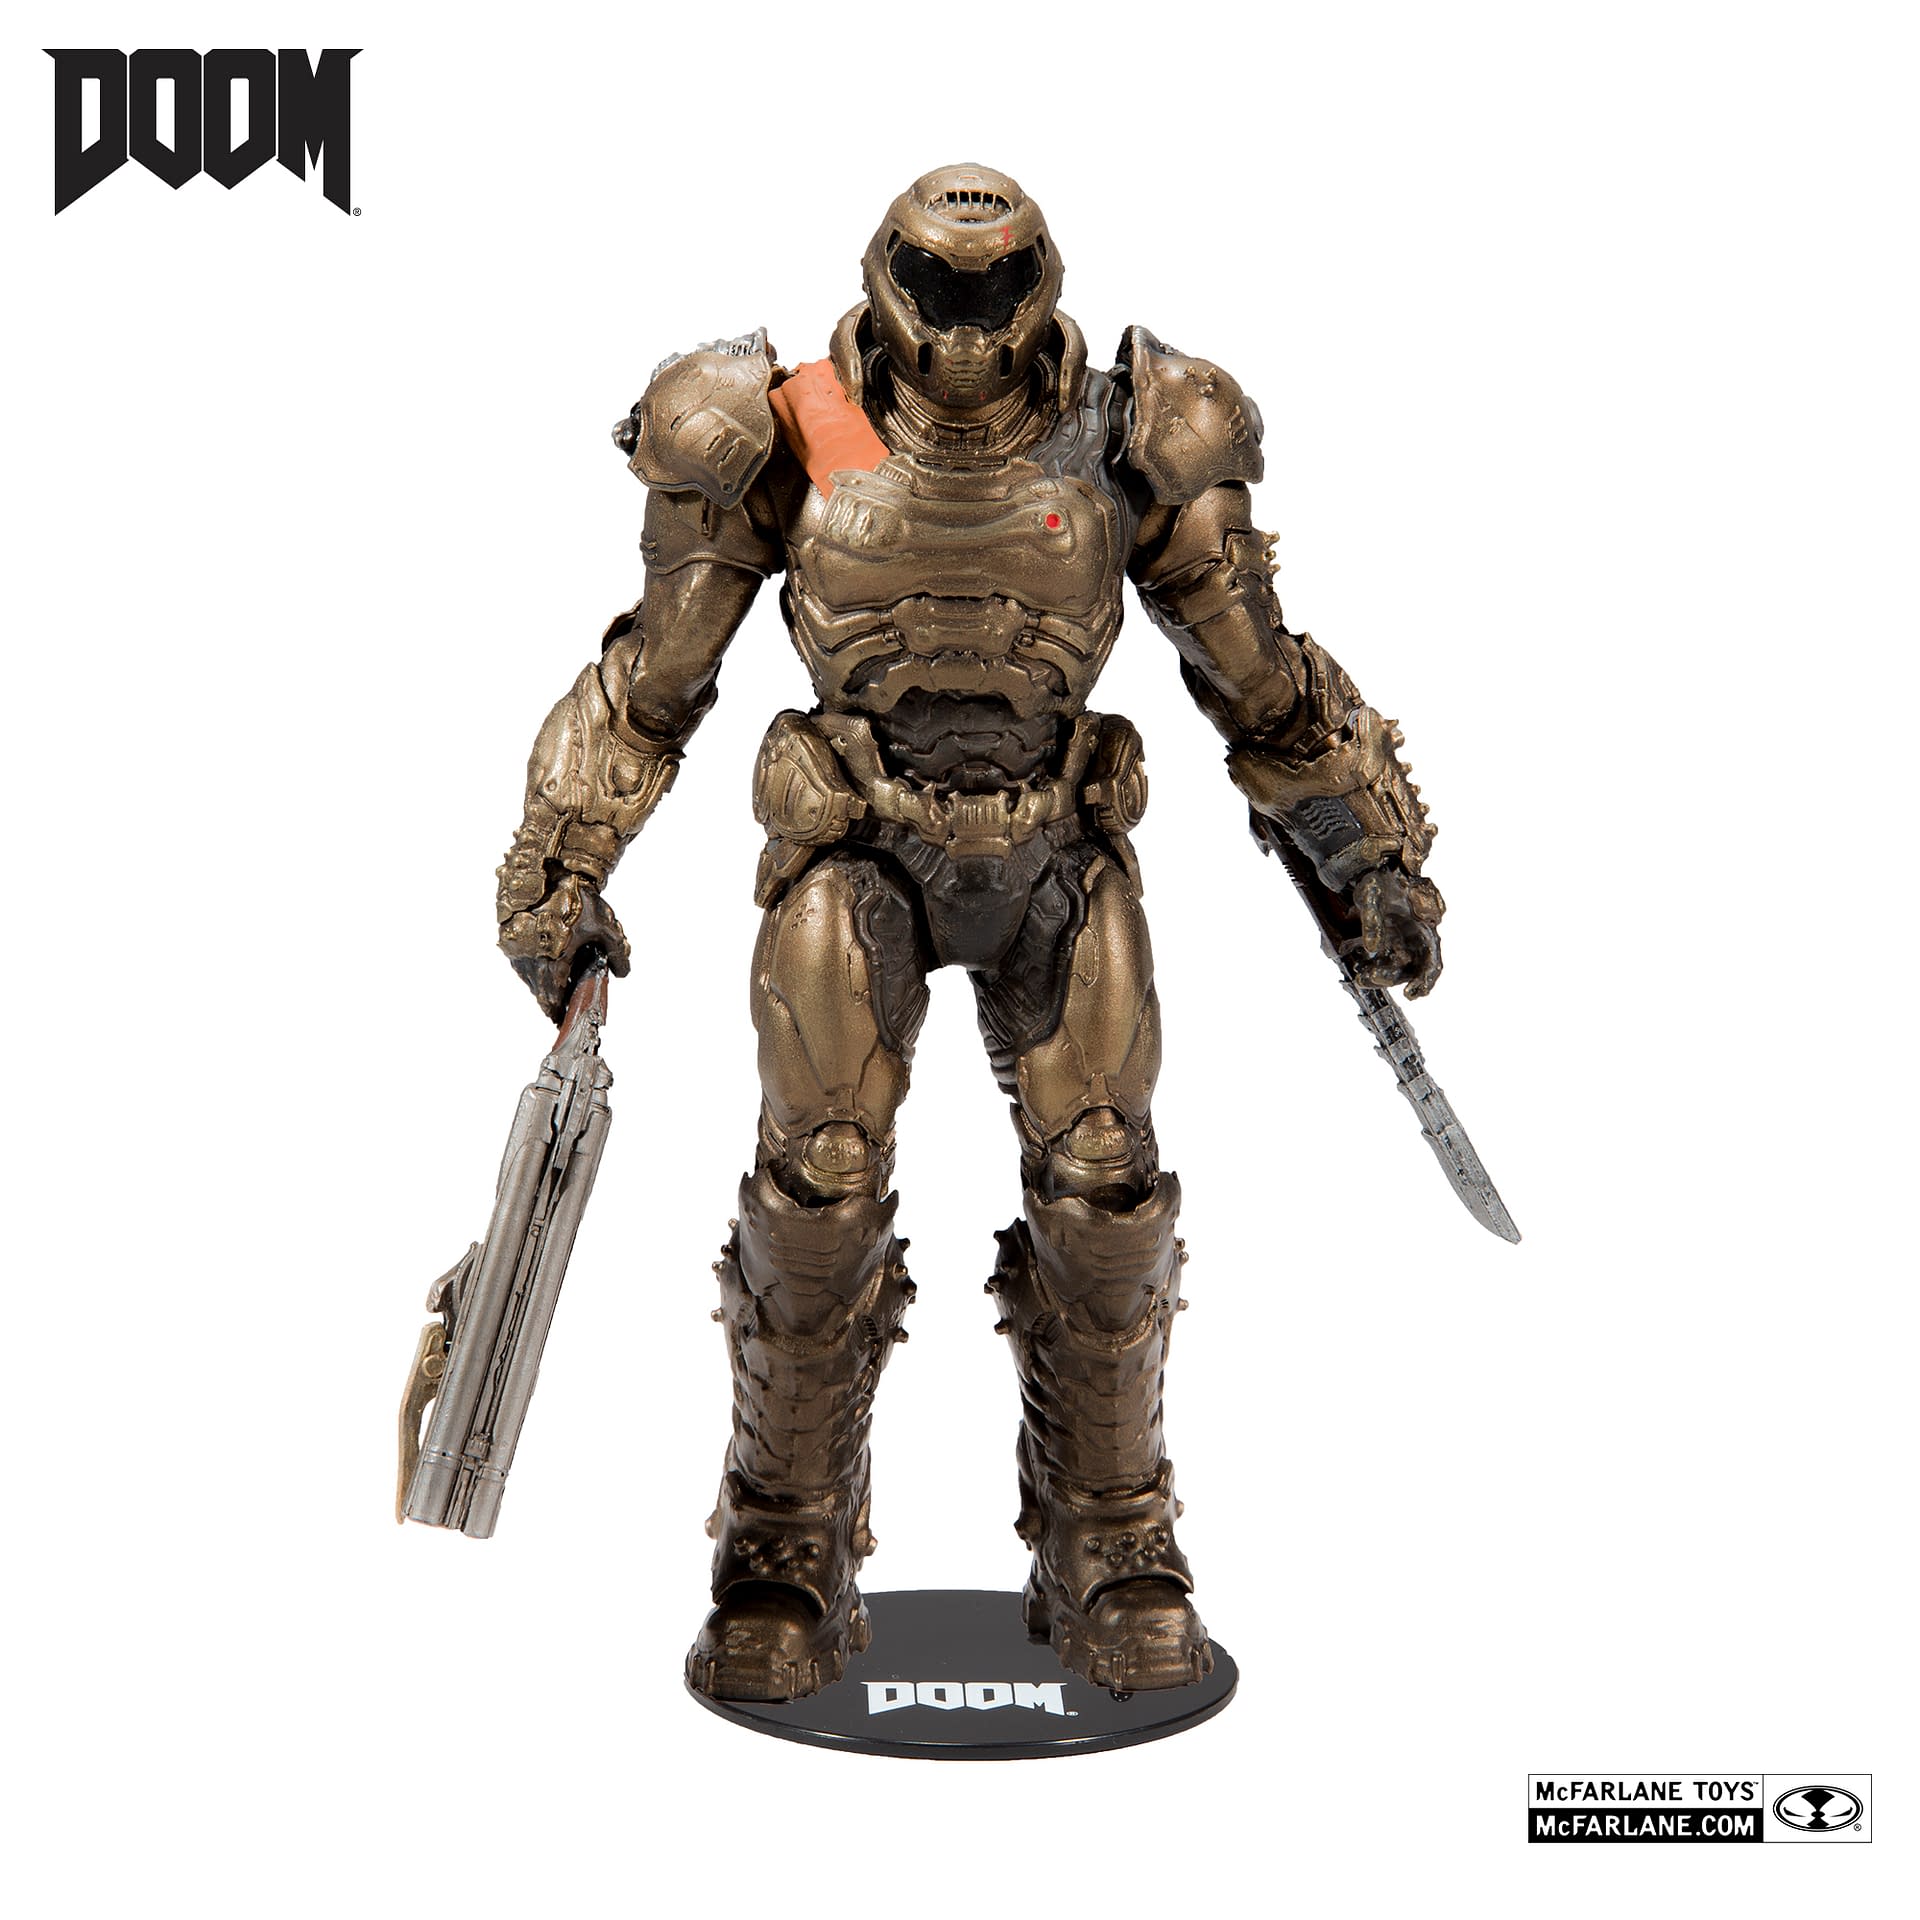 Doom Guy Gets an Exclusive Variant Figure from McFarlane Toys